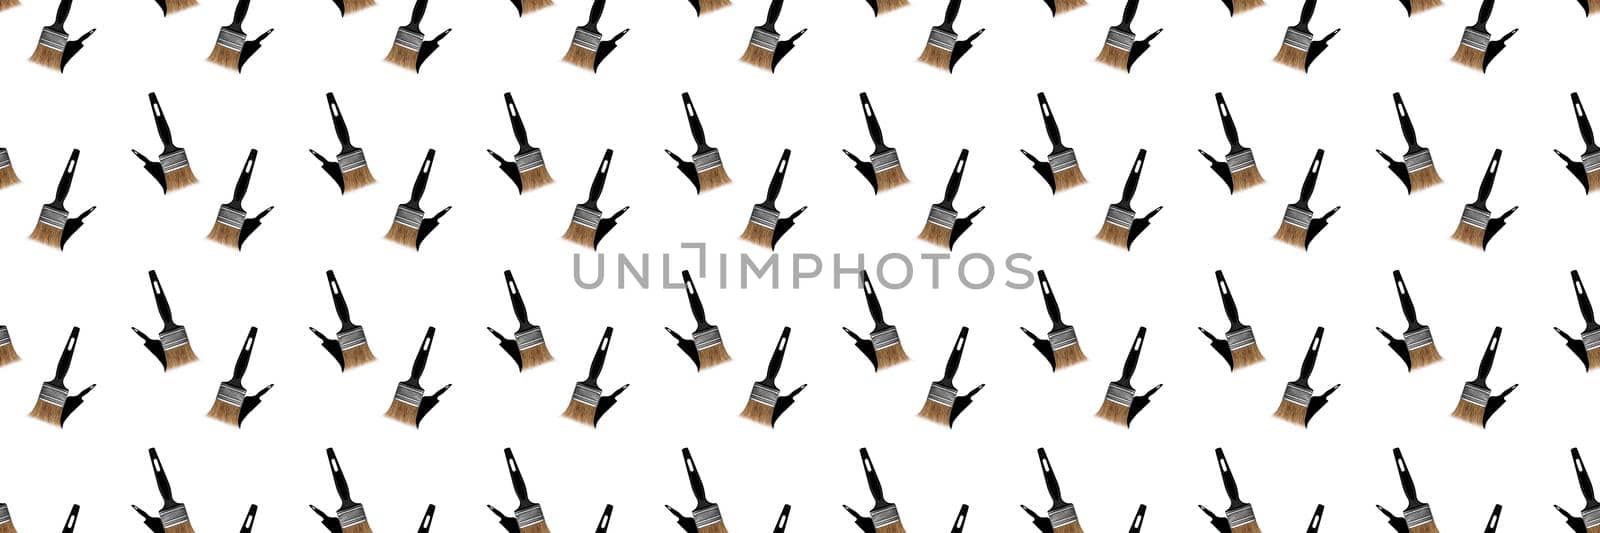 Construction brushes with shadow on a white background. Seamless texture of construction brushes.